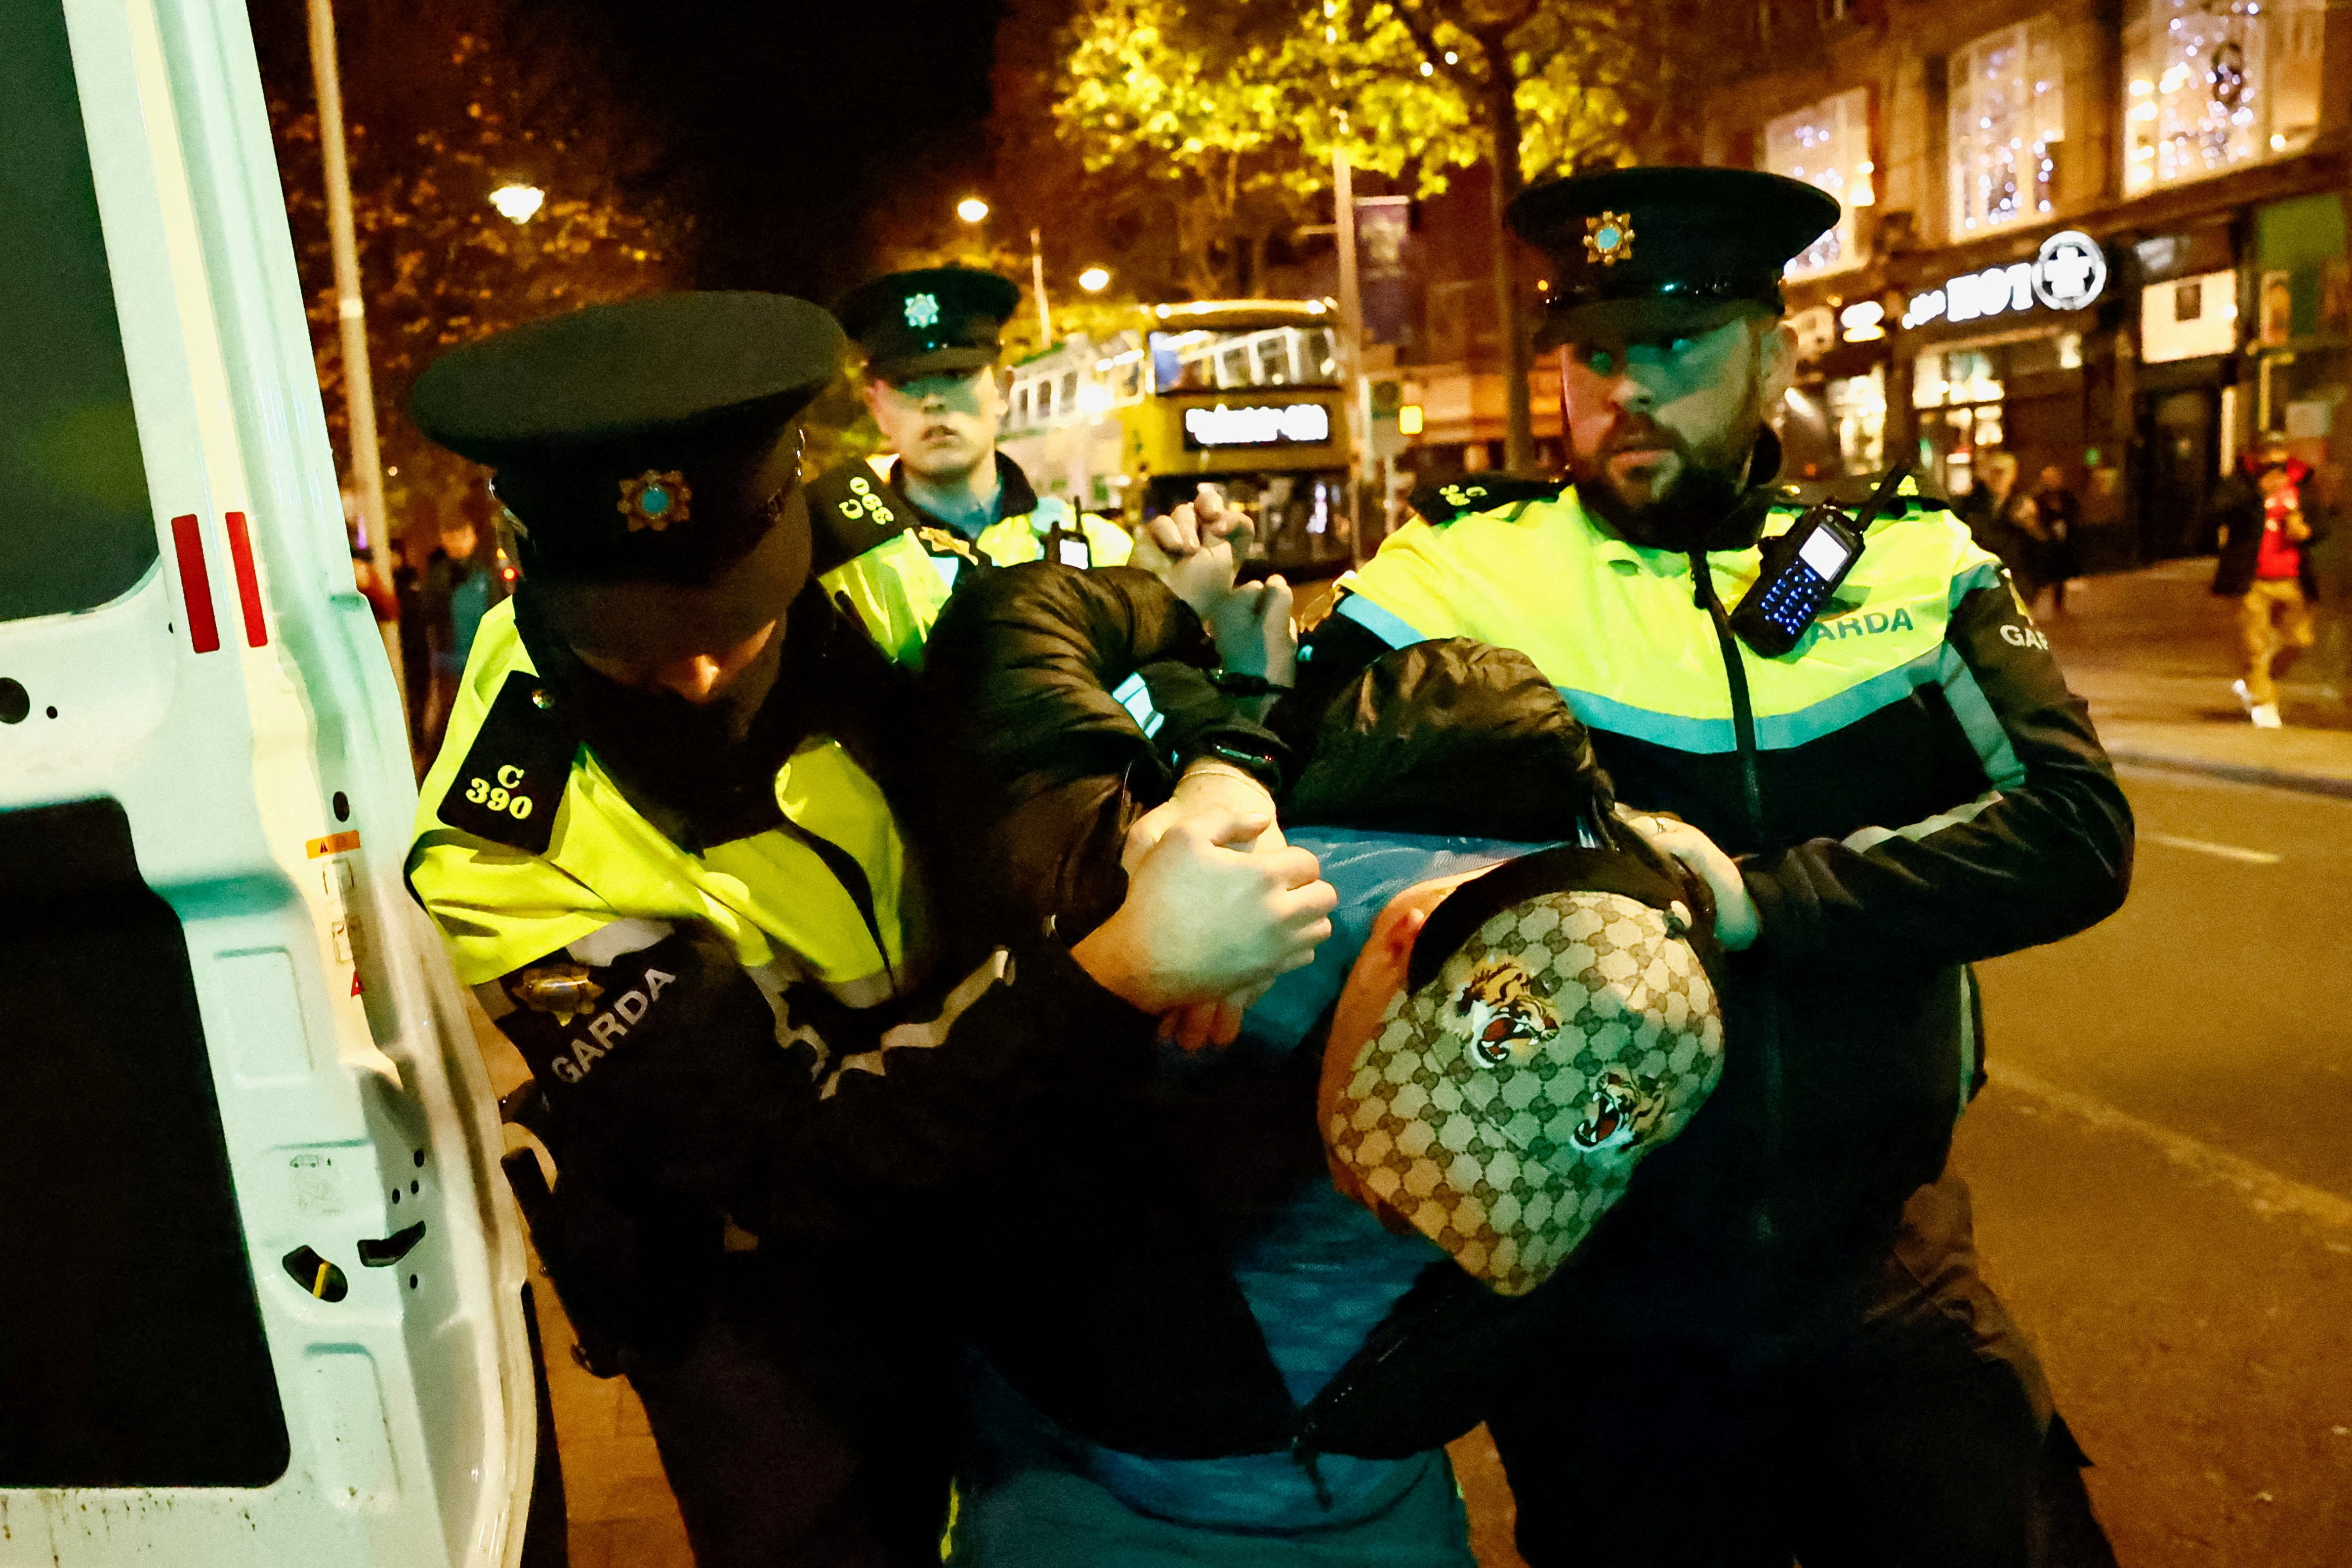 Members of the Garda Public Order Unit detain a man, following the riot in the aftermath of the school stabbing in Dublin